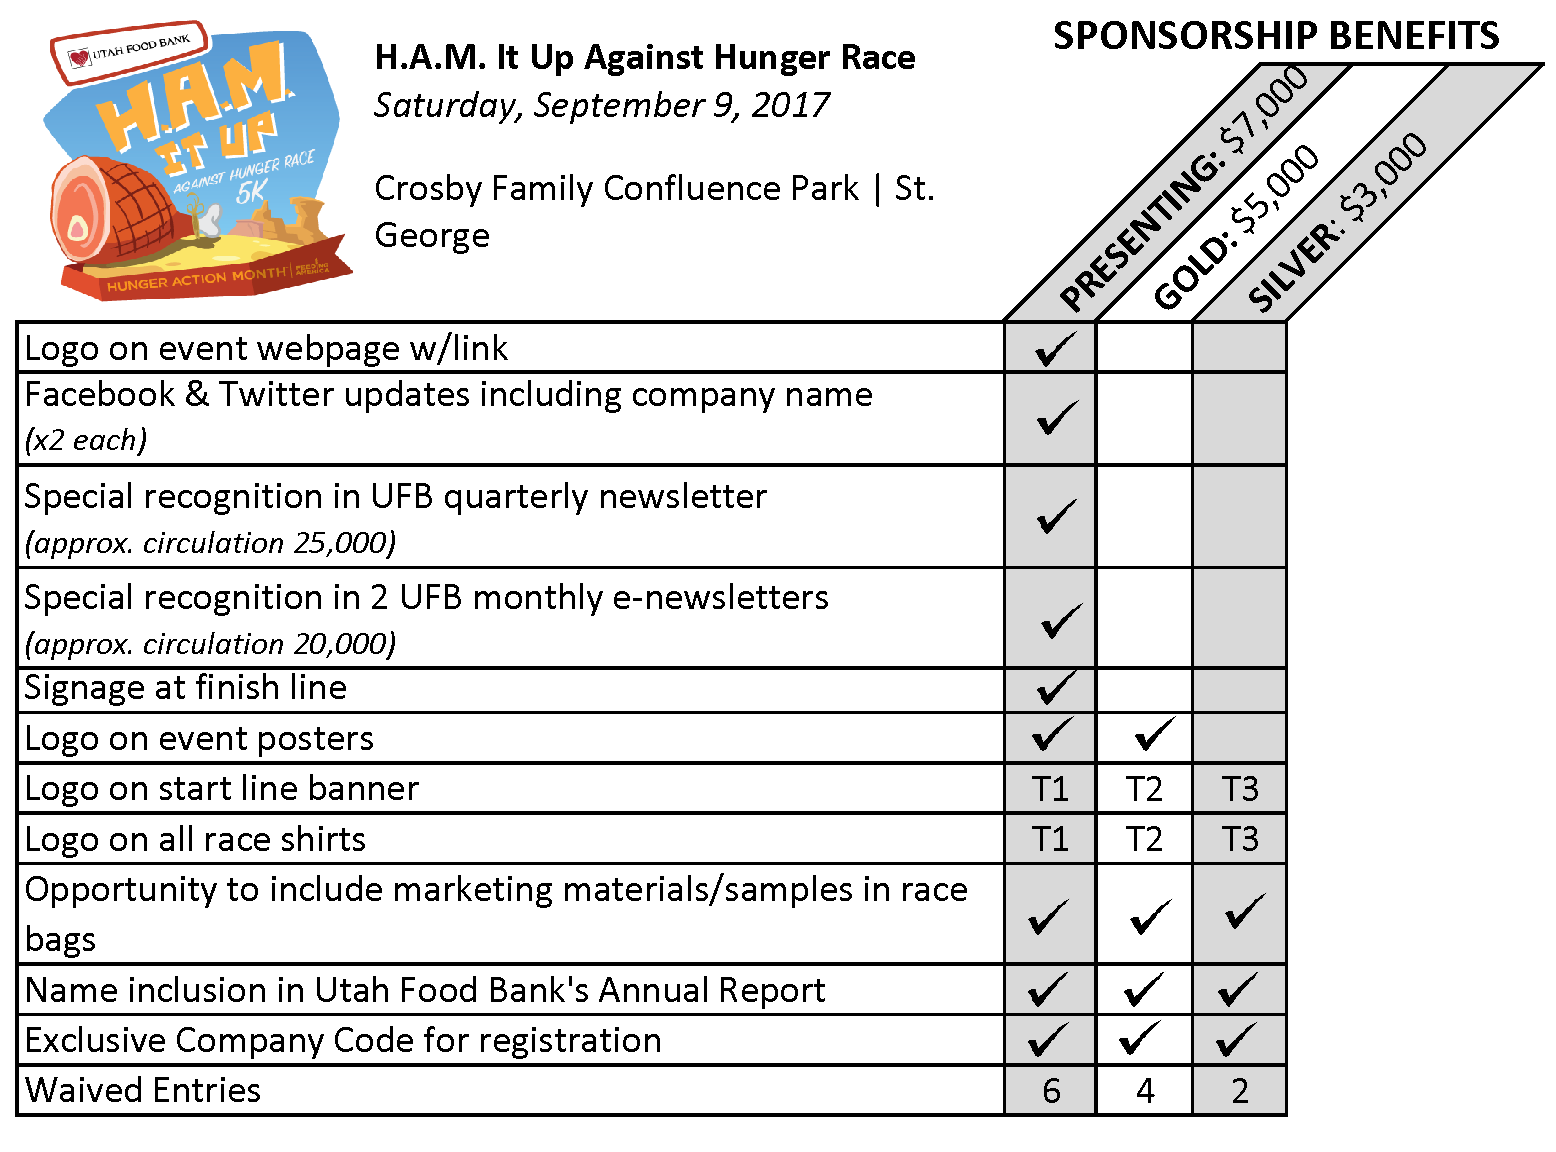 H.A.M. It up Against Hunger Race Sponsorship Benefits